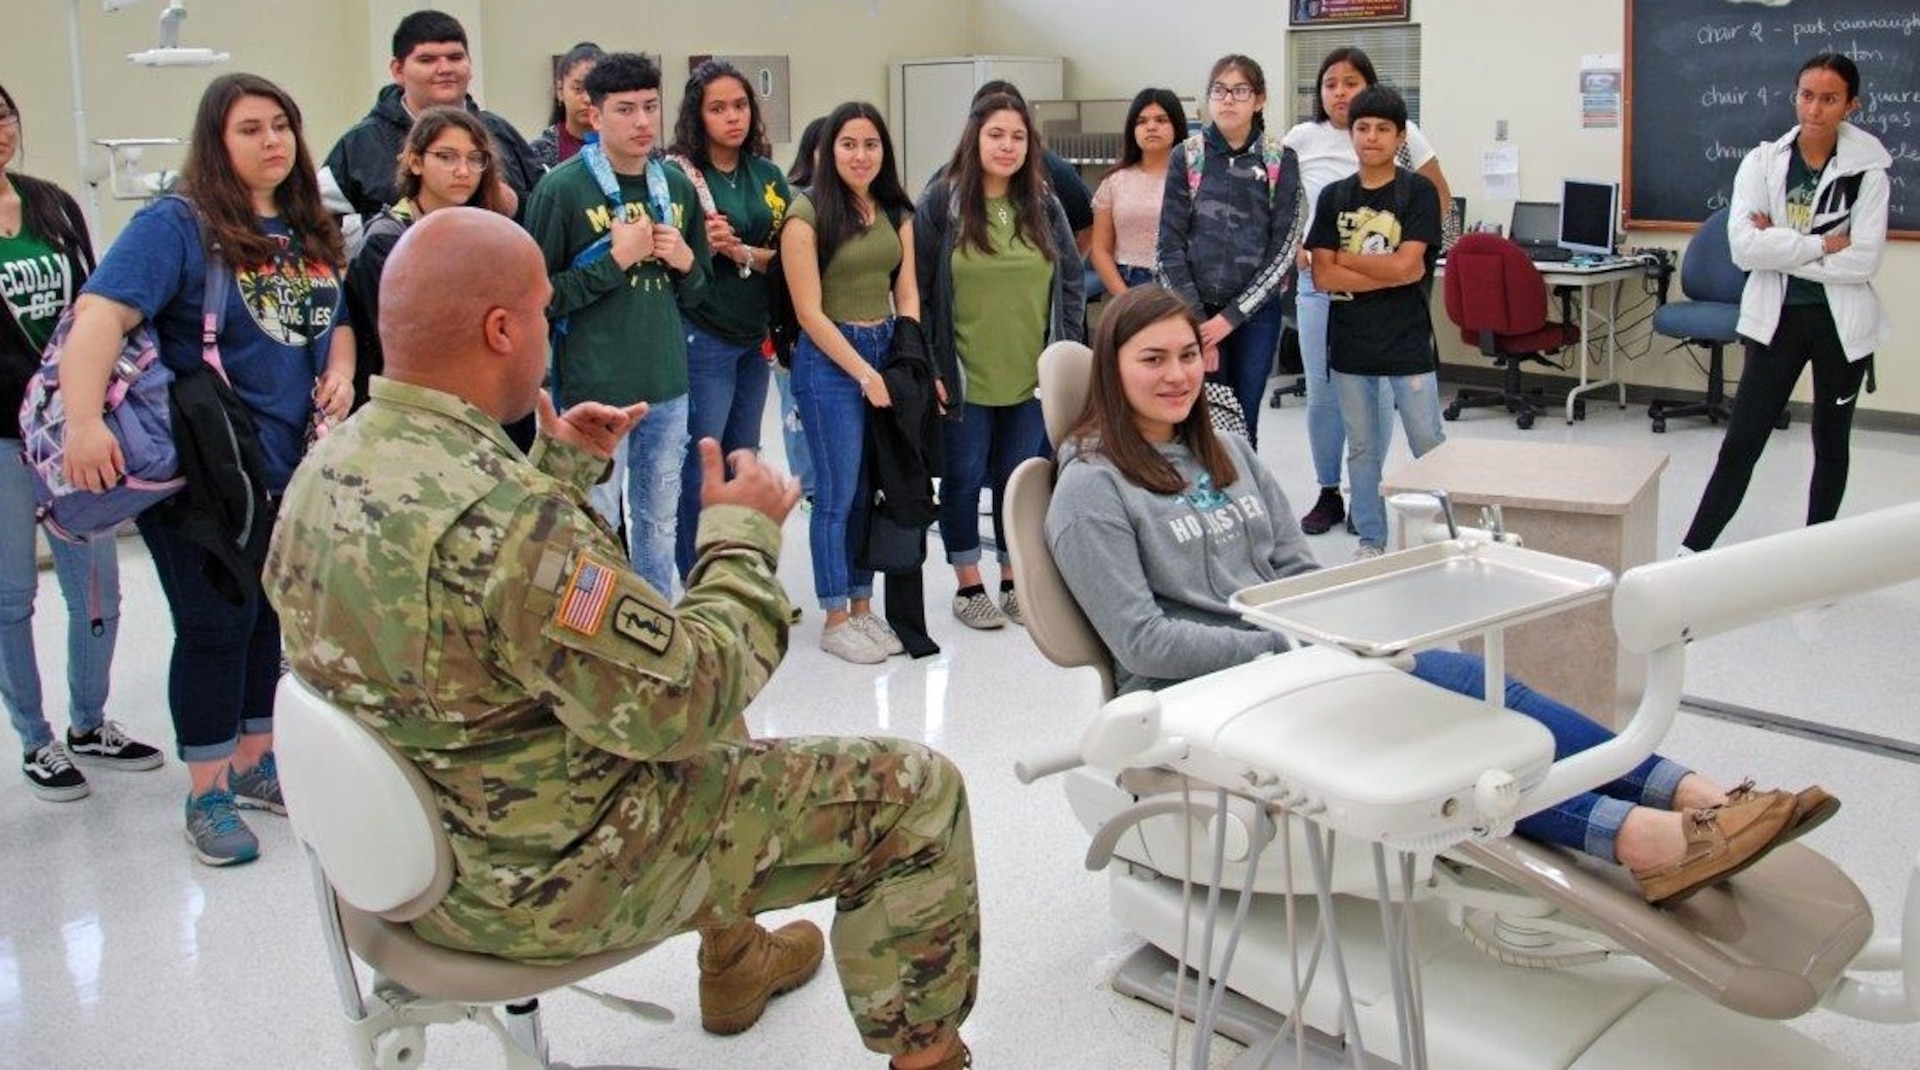 Staff Sgt. James Mcalister, NCOIC Dental Department, Preventative Medicine, briefs students on the training and equipment used in the dental program while Taetum, a freshman in McCollum High School's health science class sits in the hot seat. Taetum plans to be a cardiac thorasic surgeon after college.